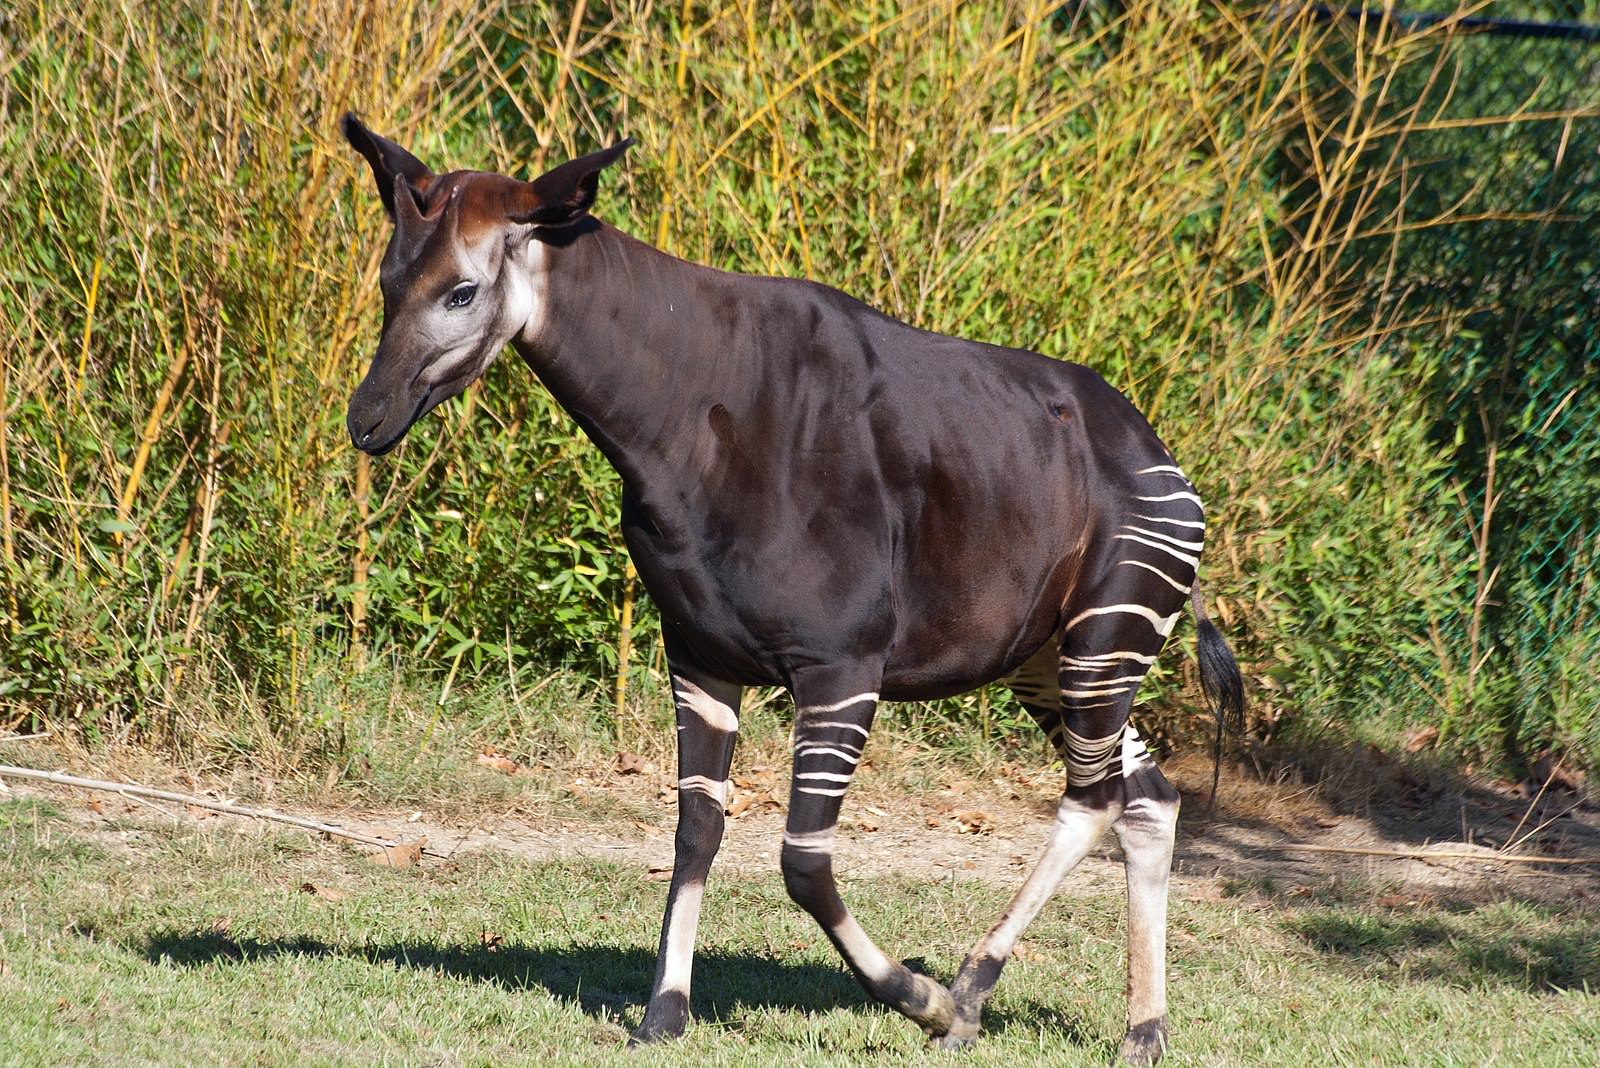 Despite its zebra-like appearance, the okapi is the closest living relative to the giraffe. These endangered animals, native to central Africa, stand at about 5 feet tall and share a common ancestor with their long-necked cousins.